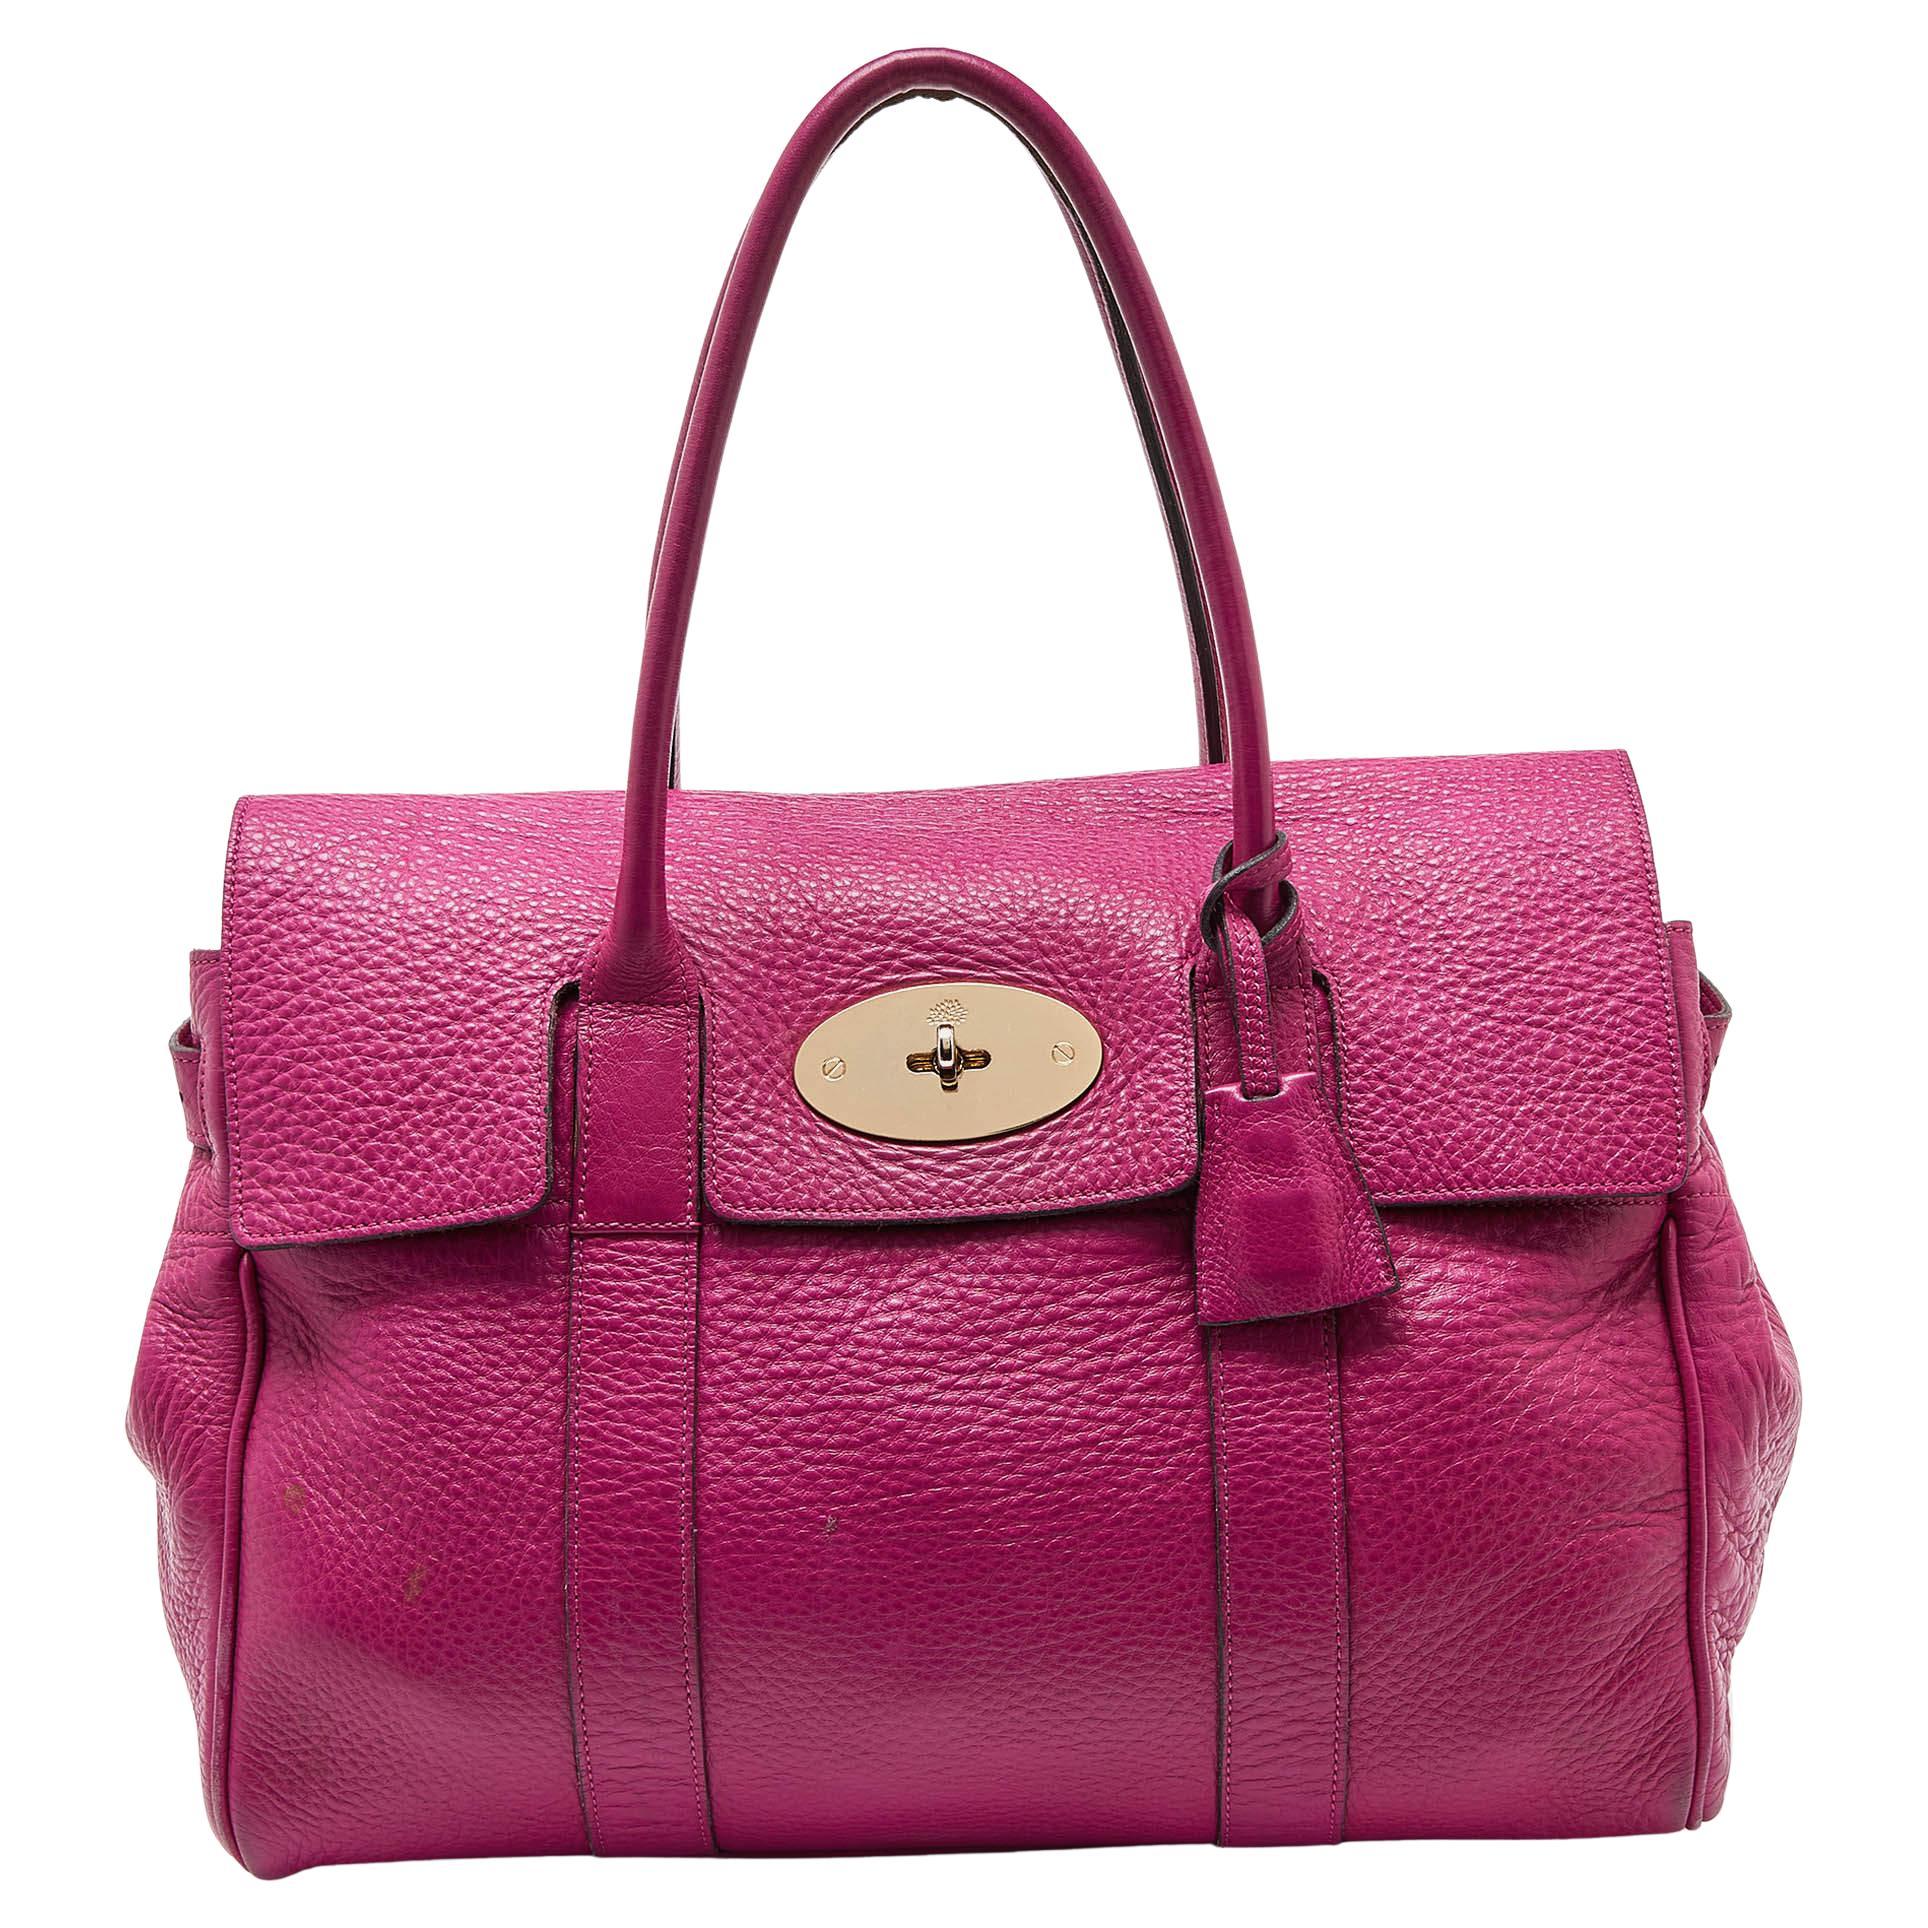 Mulberry Fuschia Grained Leather Bayswater Satchel